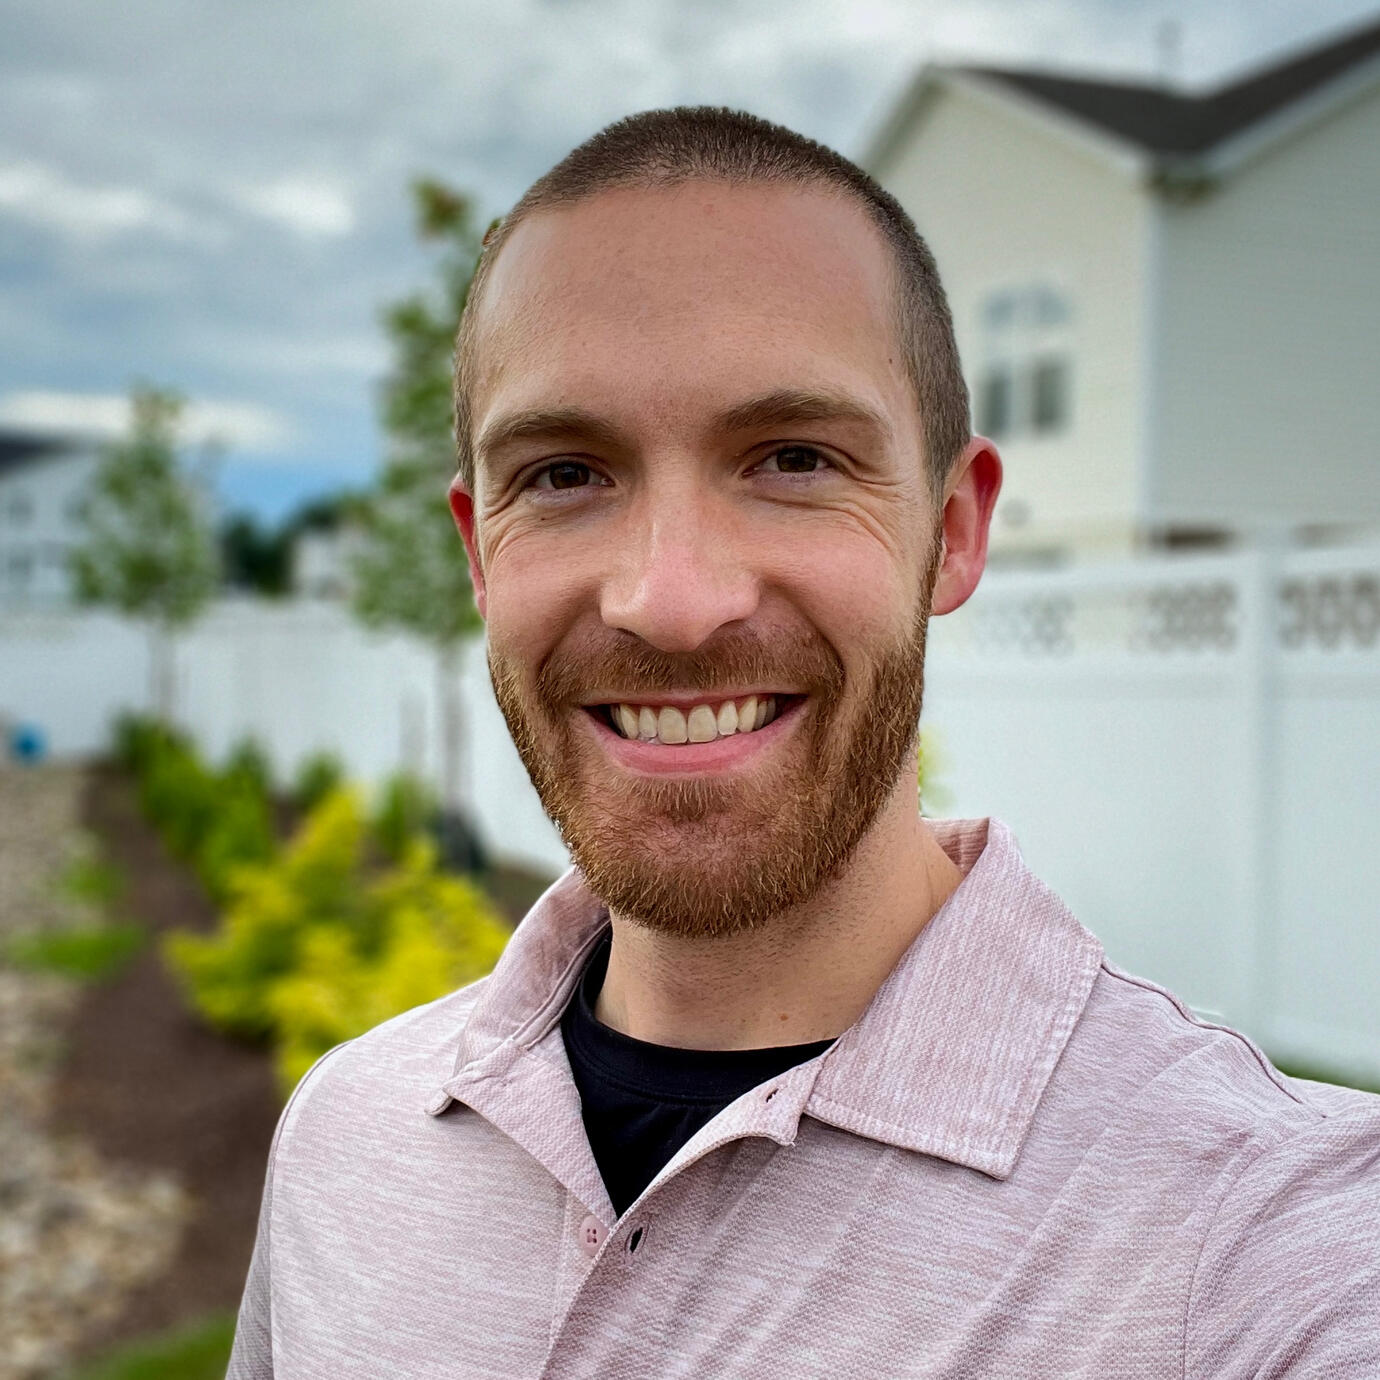 profile photo of a white male with short beard smiling